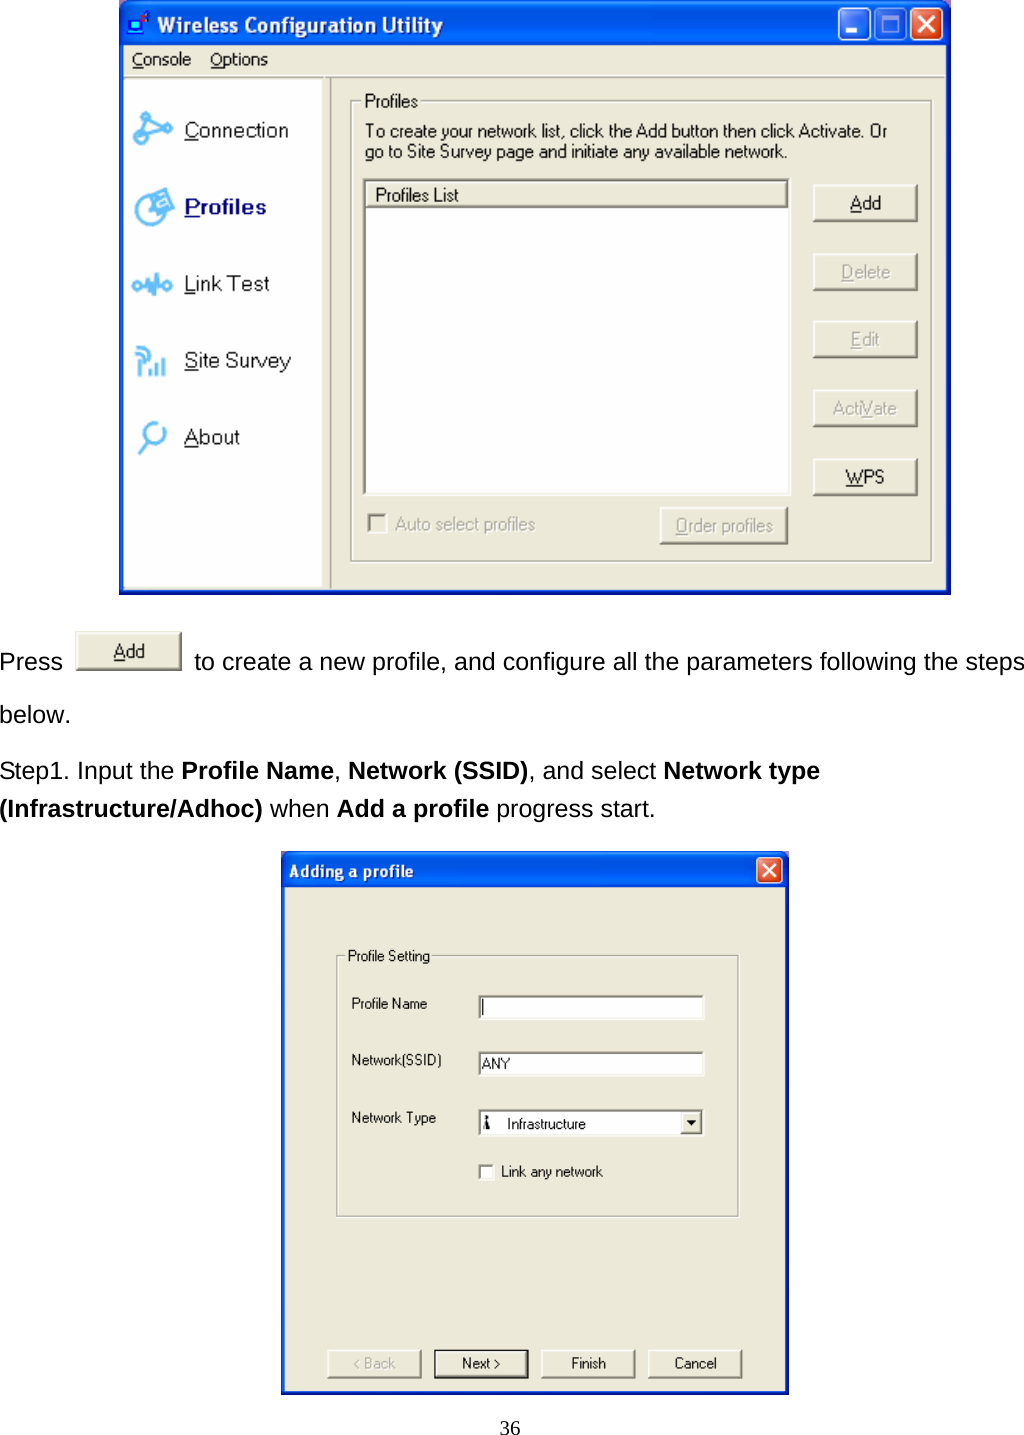  36  Press    to create a new profile, and configure all the parameters following the steps below. Step1. Input the Profile Name, Network (SSID), and select Network type (Infrastructure/Adhoc) when Add a profile progress start.  